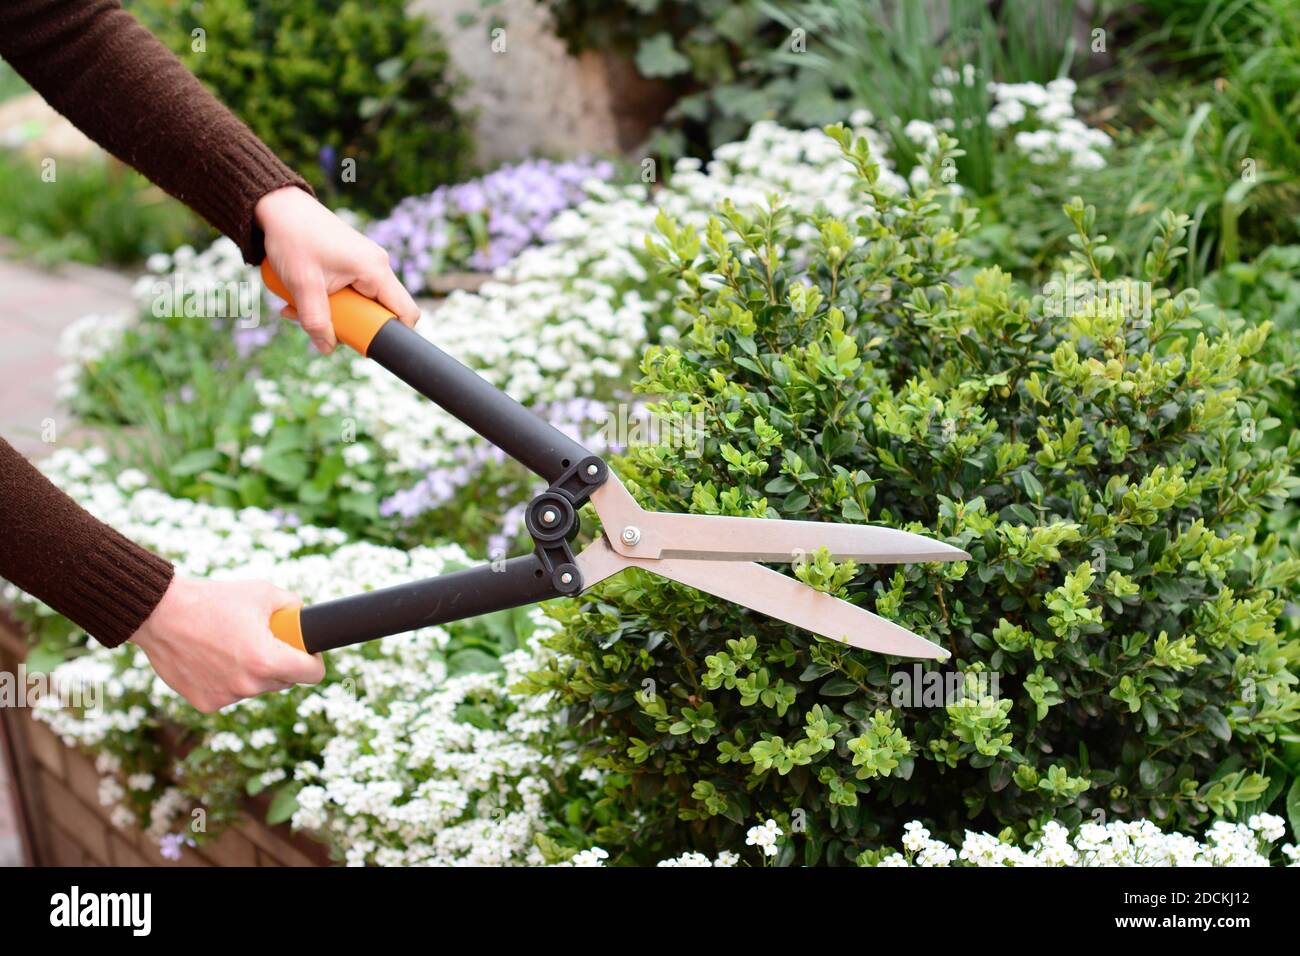 A gardener is trimming, cutting, pruning  buxus, boxwood bush, shrub, forming a ball to encourage branching and new growth with blooming arabis. Stock Photo